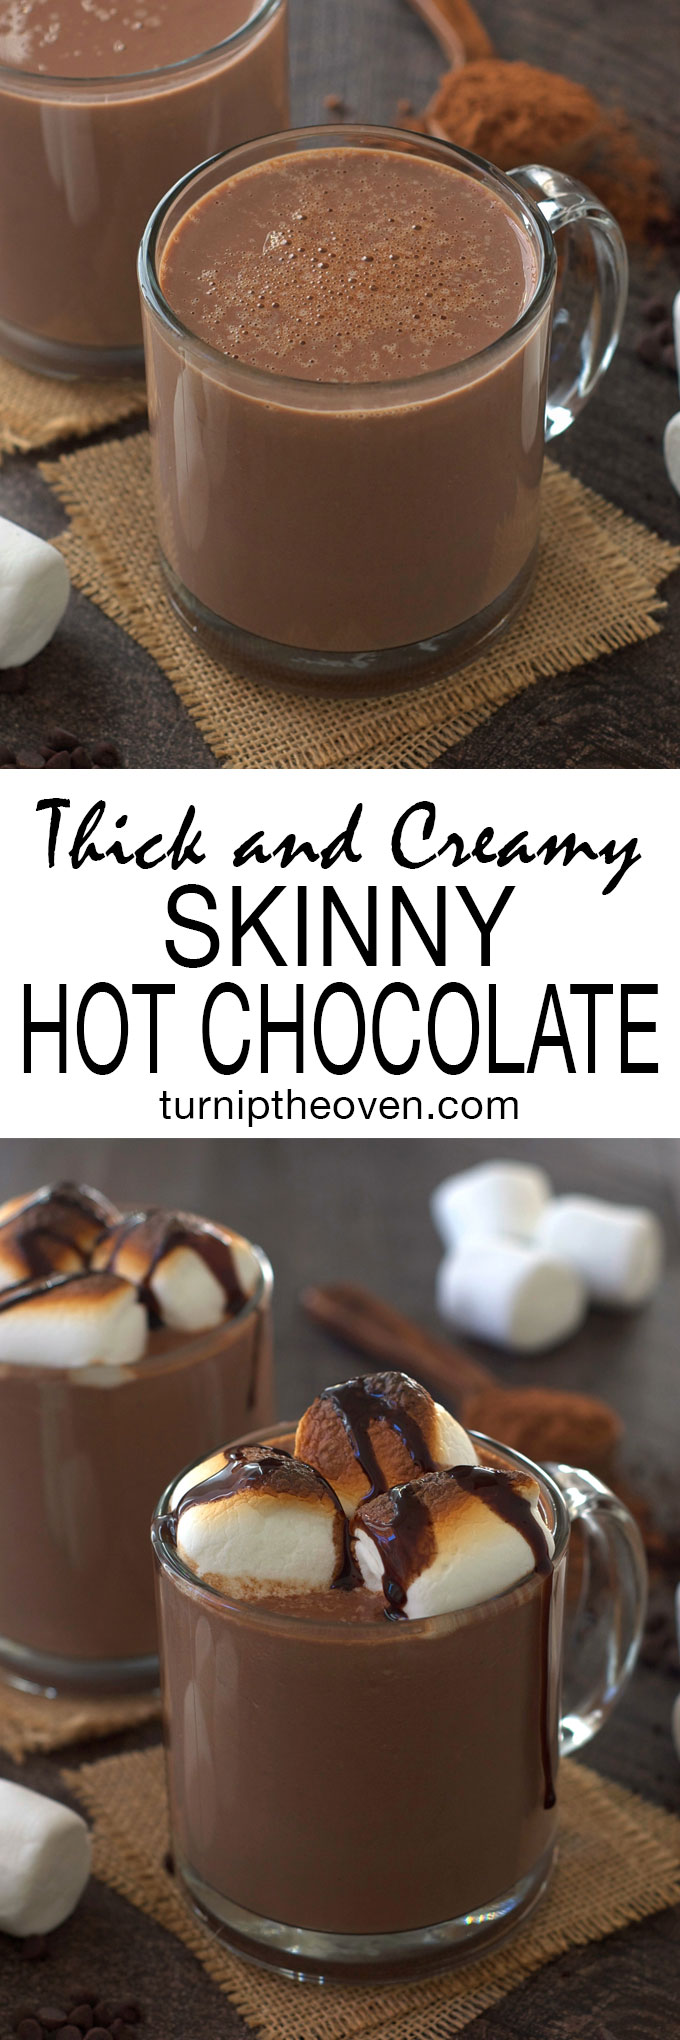 You will never believe this super thick and creamy skinny hot chocolate is made with low-fat milk and has fewer than 250 calories per cup!